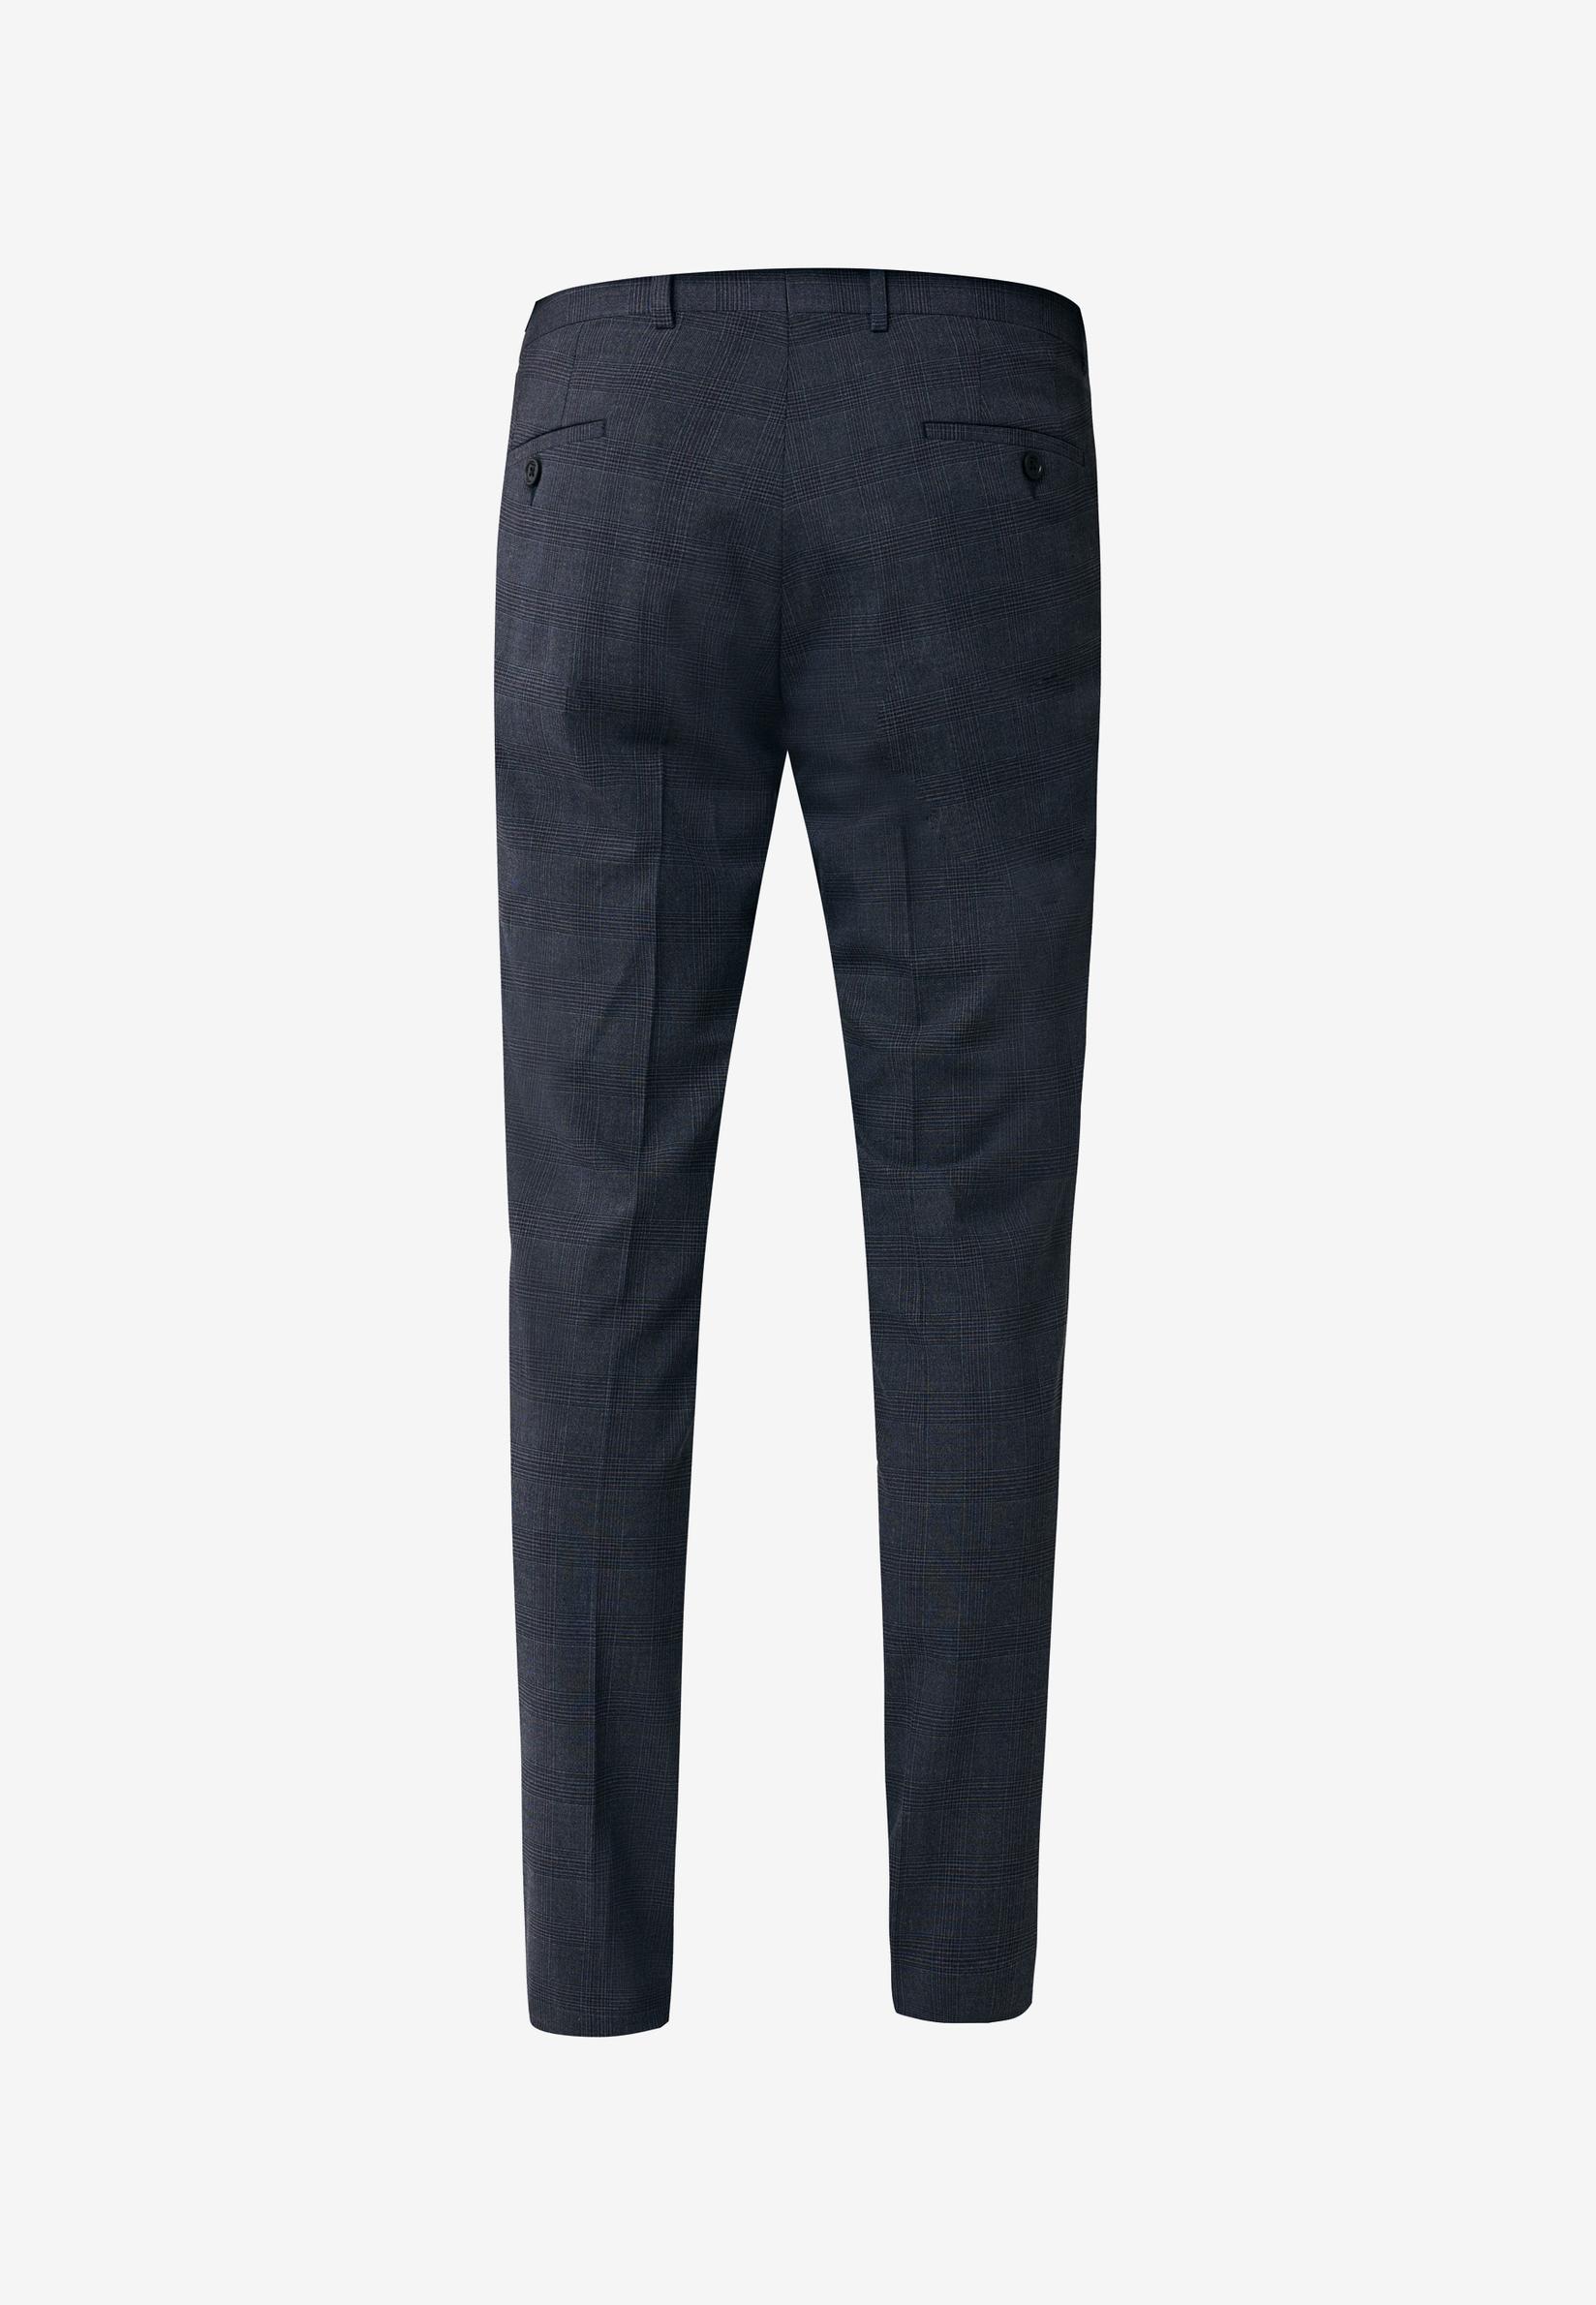 Selected image for MEXX Muške pantalone Slim fit checked teget